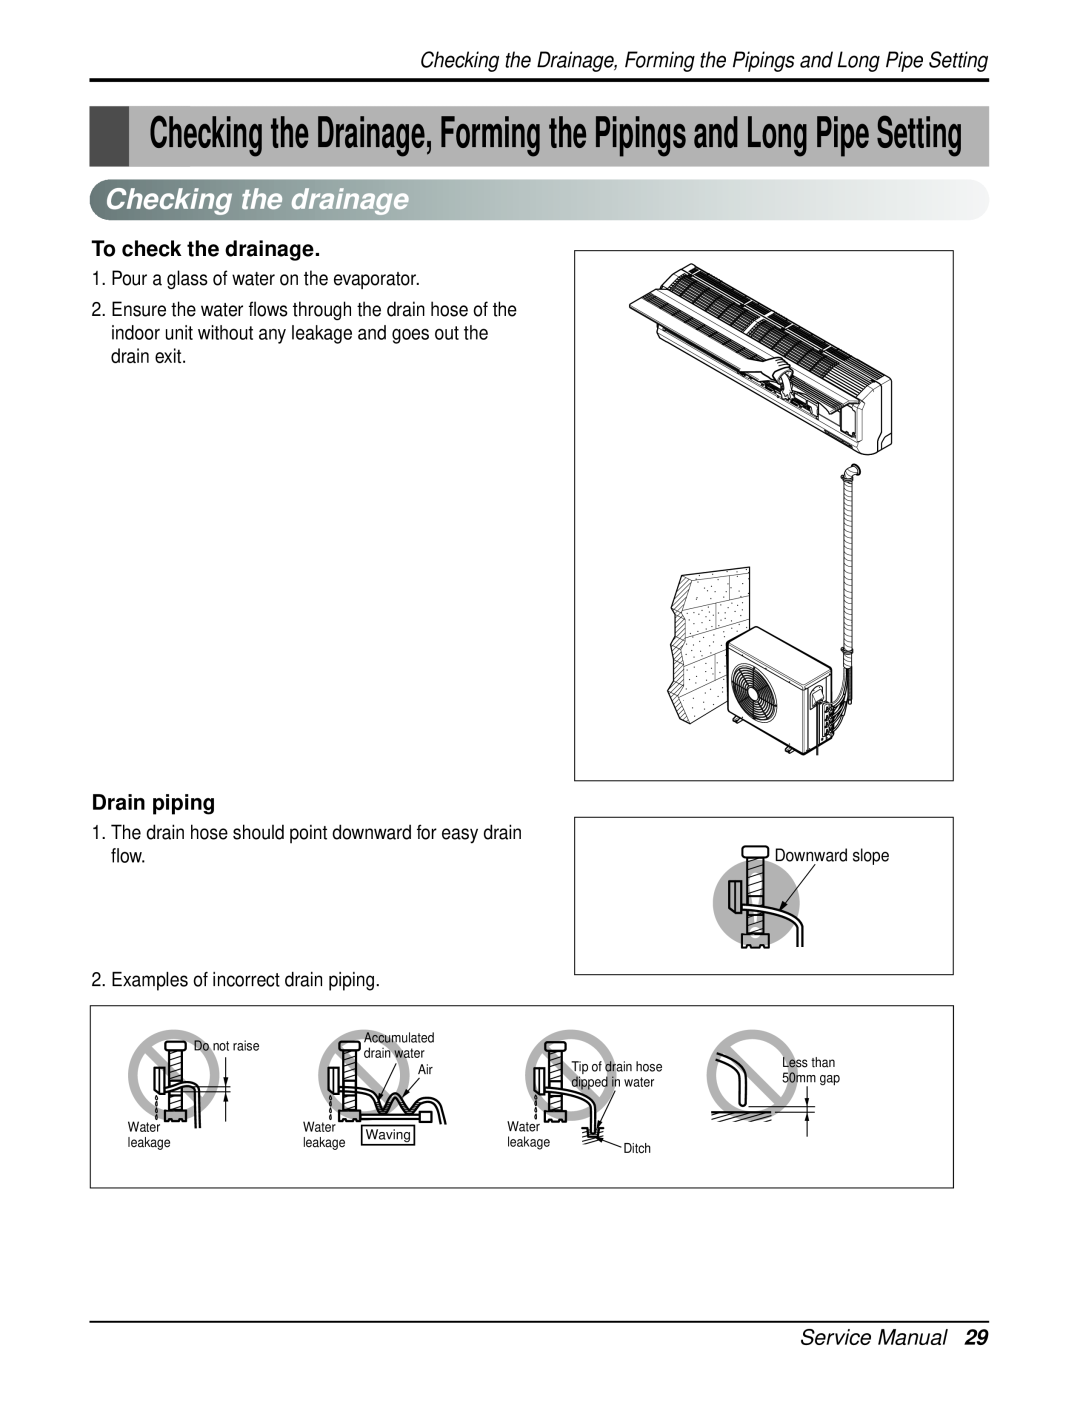 Heat Controller DMH18DB-1 manual Checkingthedrainage, To check the drainage, Drain piping, Service Manual 